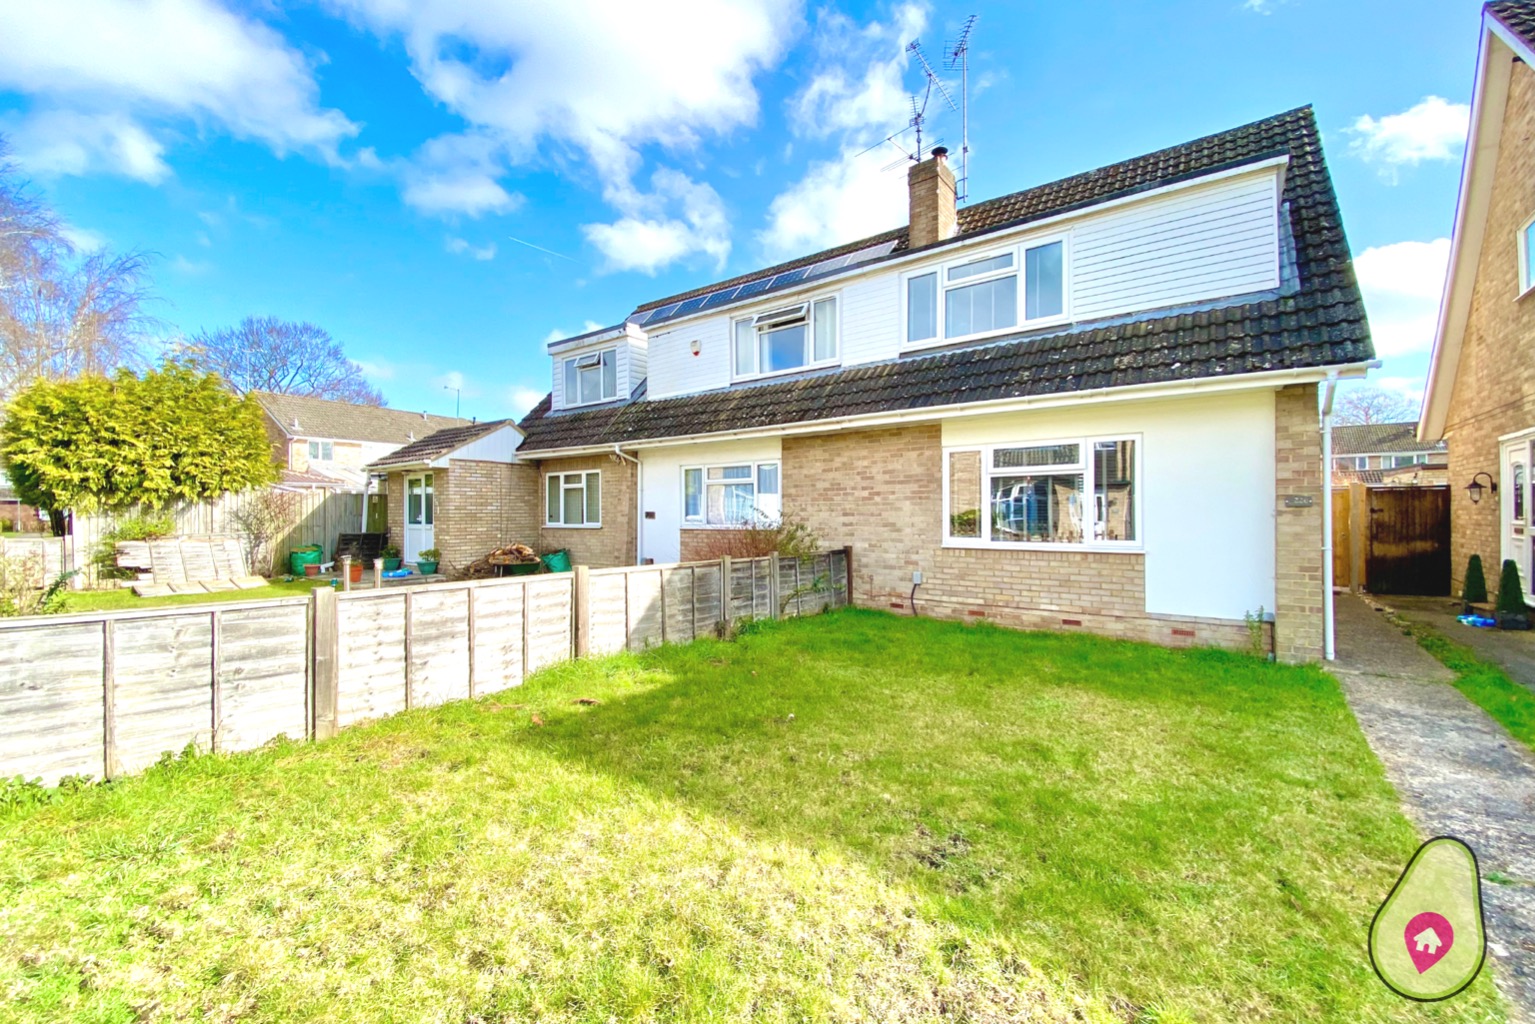 This stunning three bedroom home has undergone a full refurbishment throughout and offers a great amount of living space, all in excellent condition.